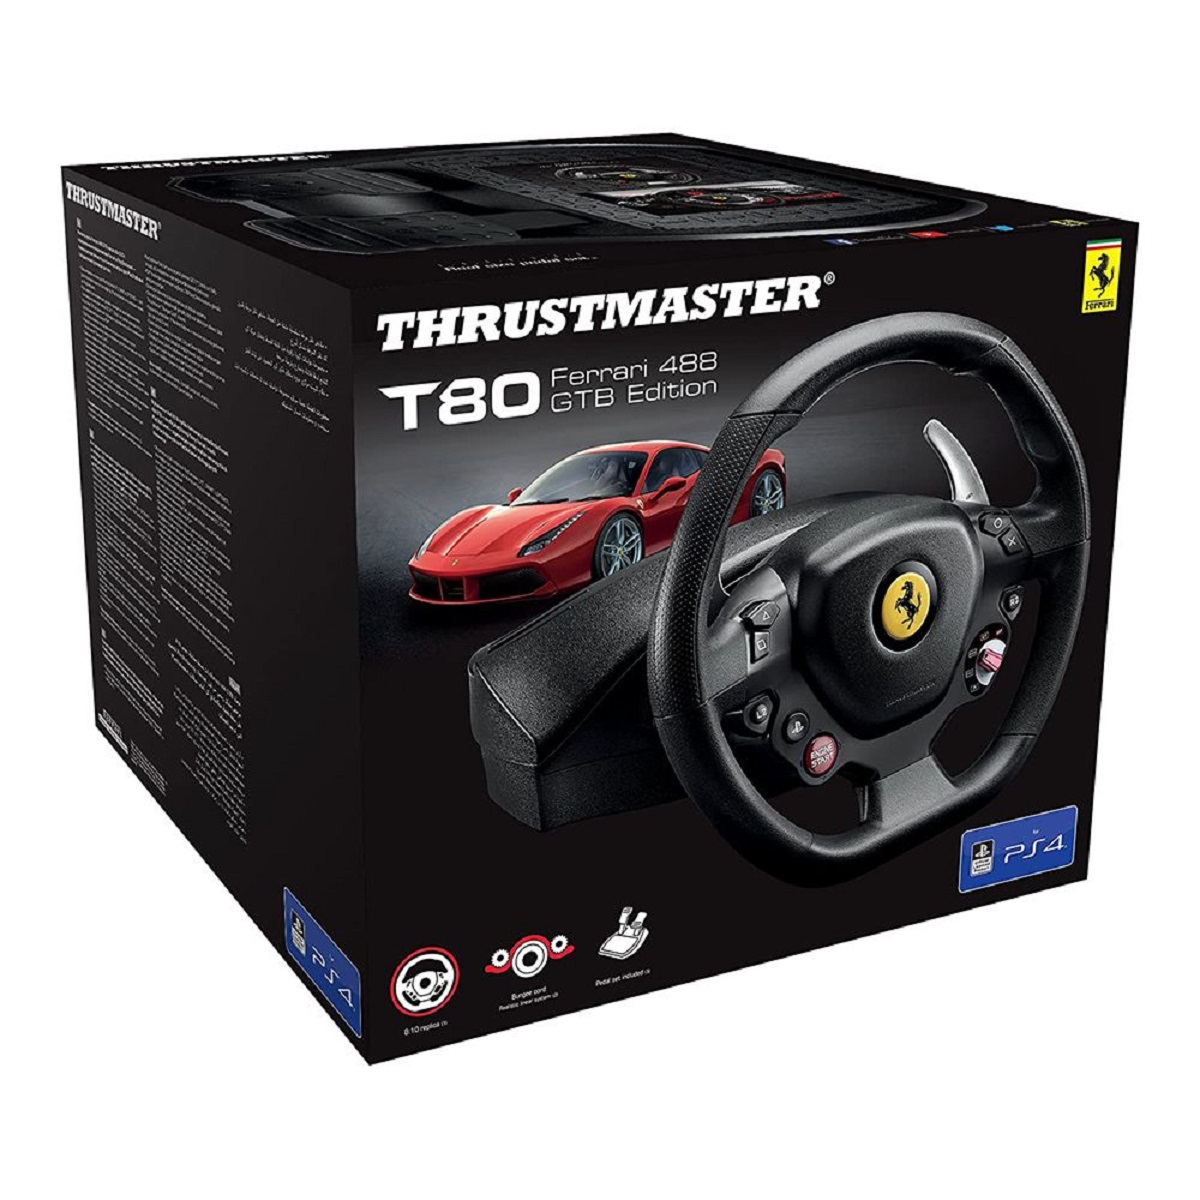 Which Video Games Work On The Thrustmaster T80 PS4 Officially Licensed Racing Wheel